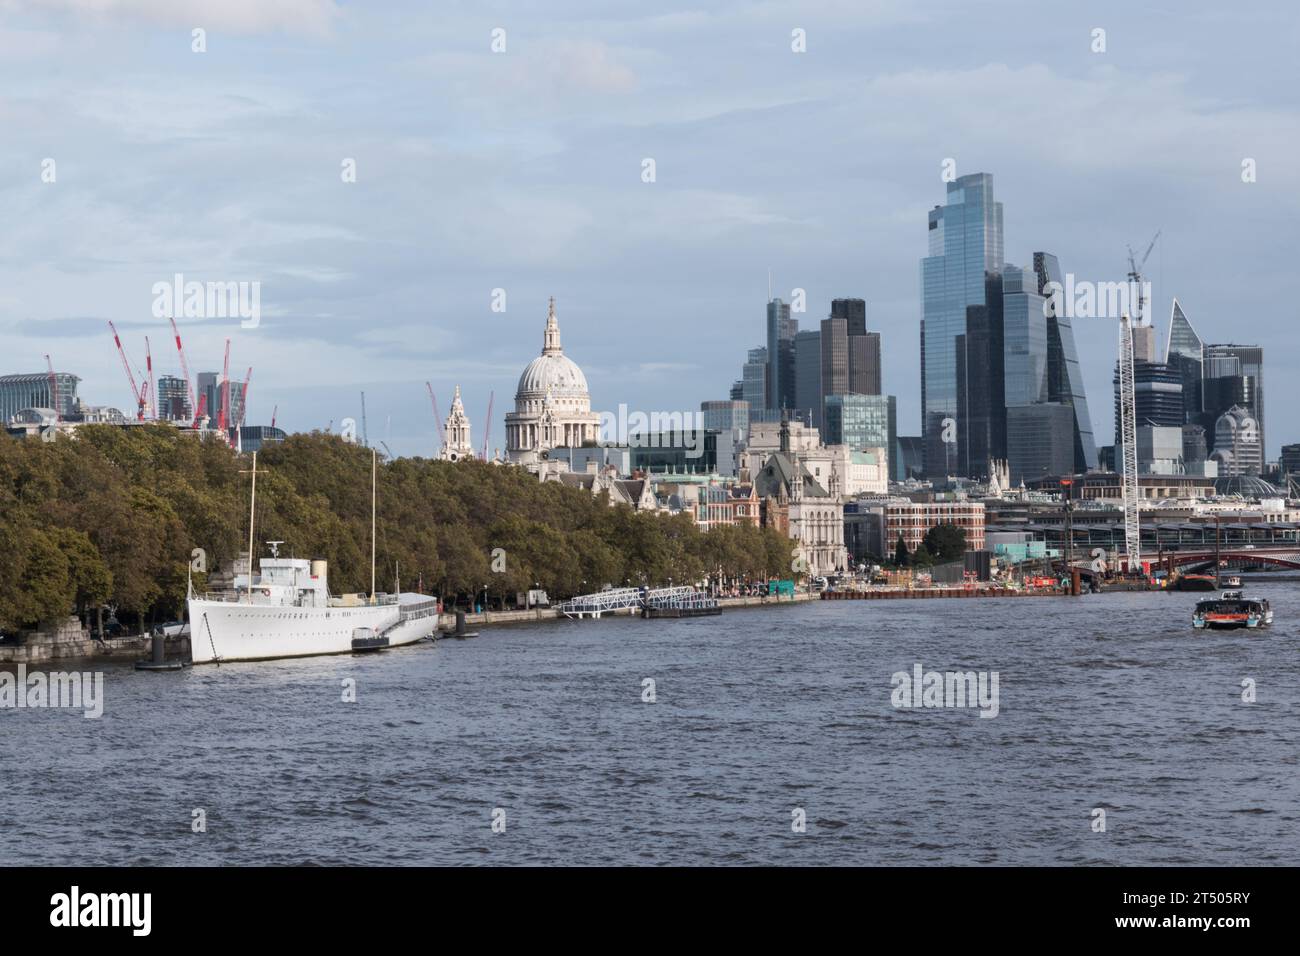 A view of the River Thames, H.M.S. Wellington and the skyscrapers of the City of London skyline, as seen from Waterloo Bridge, London, England, UK Stock Photo